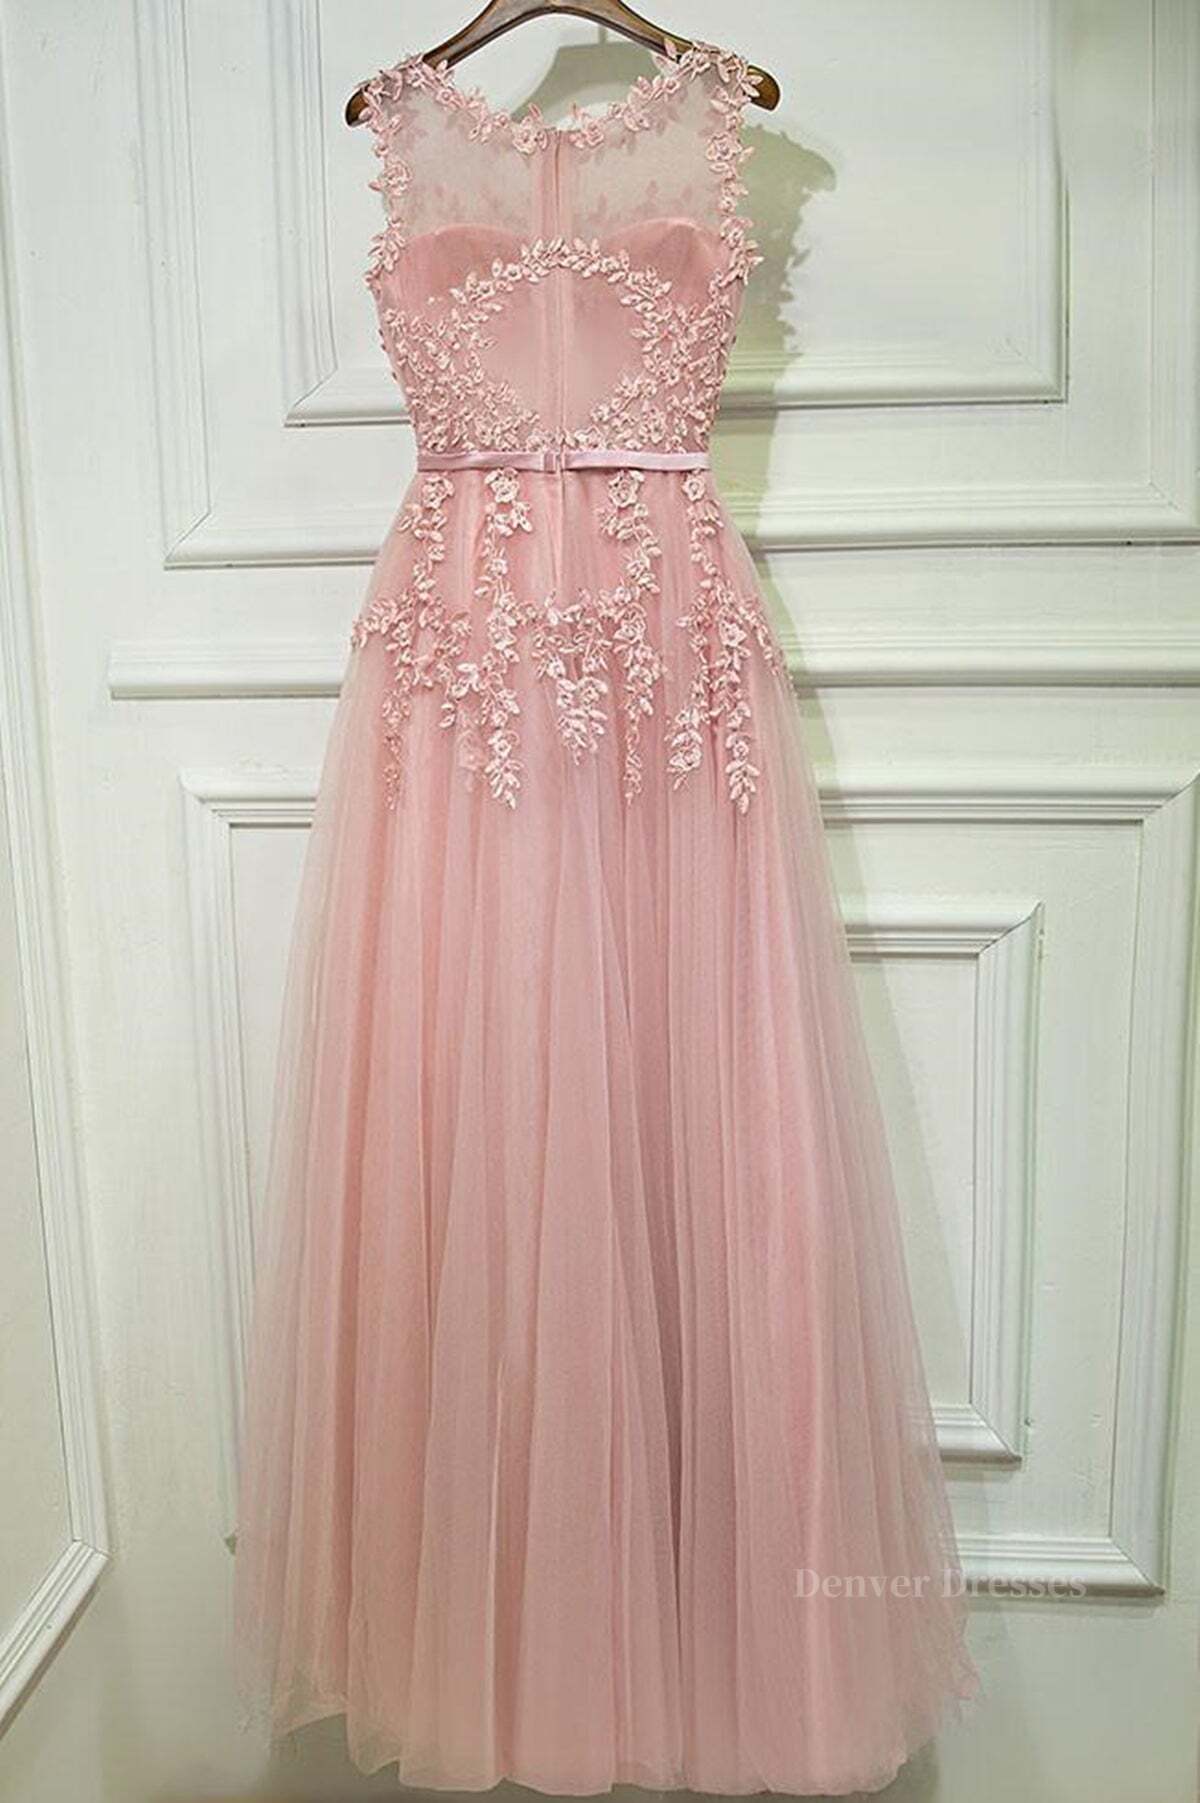 Maxi Dress Outfit, Round Neck Lace Prom Dresses, Lace Formal Evening Dresses